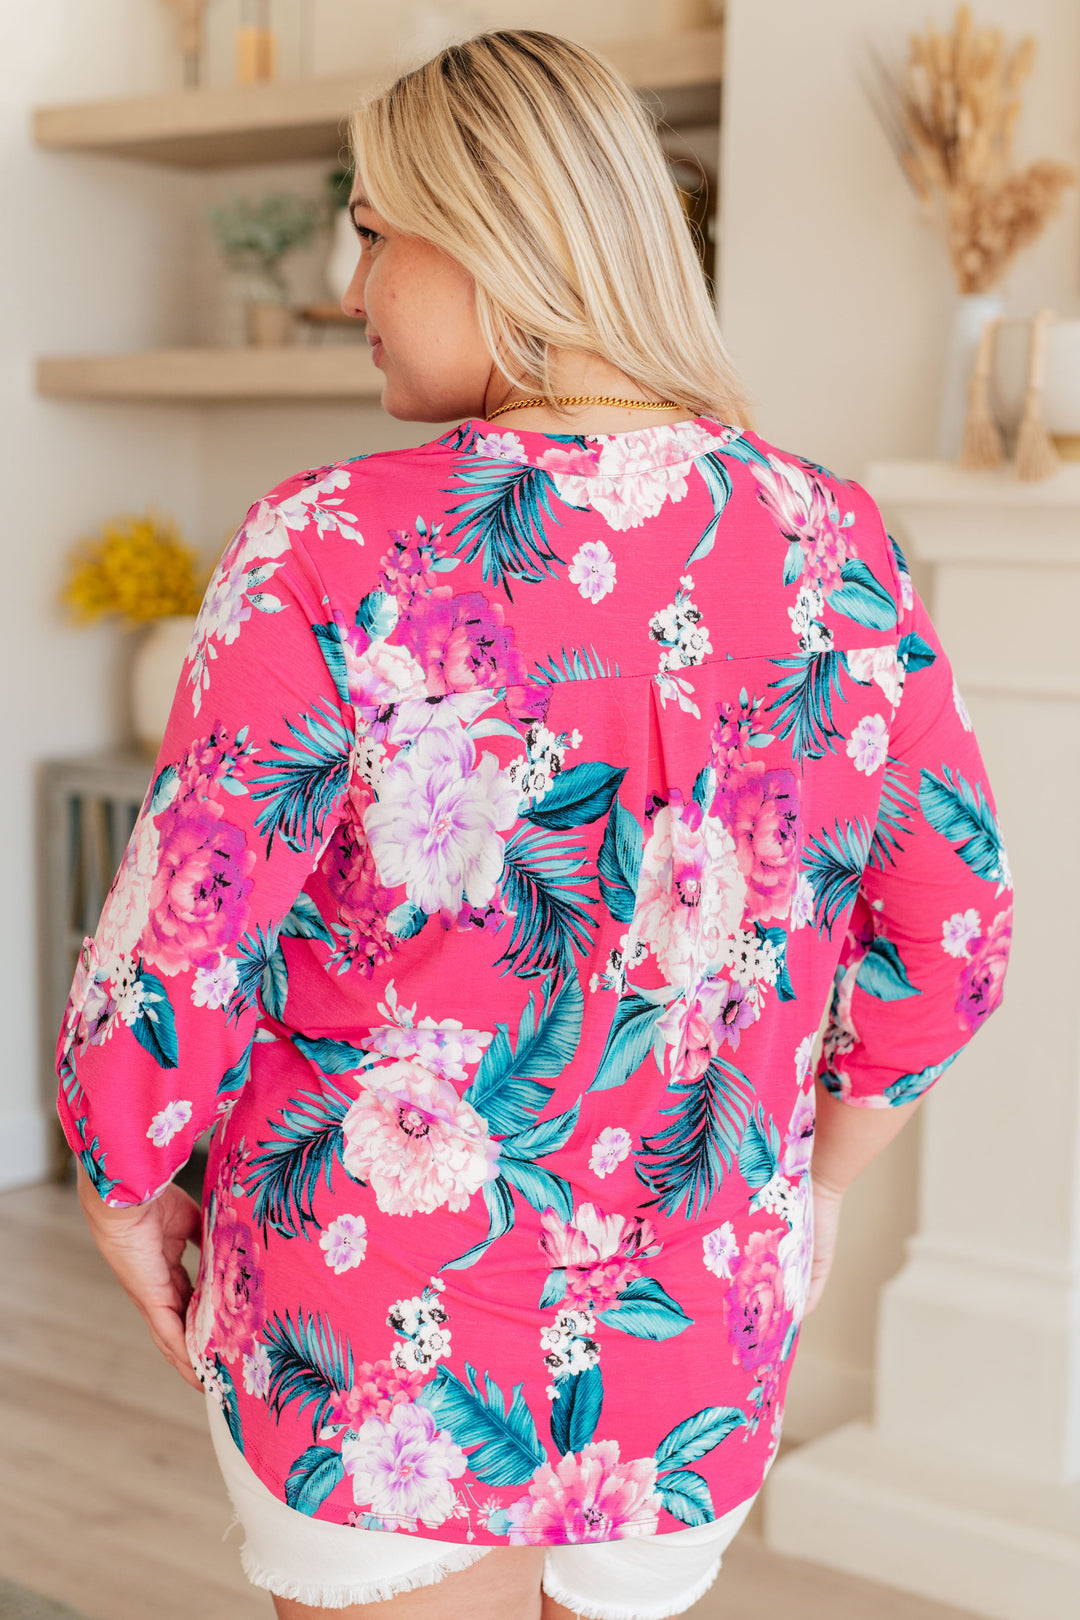 Chic & Easy 3/4 Sleeve Top - Teal Tropical Floral